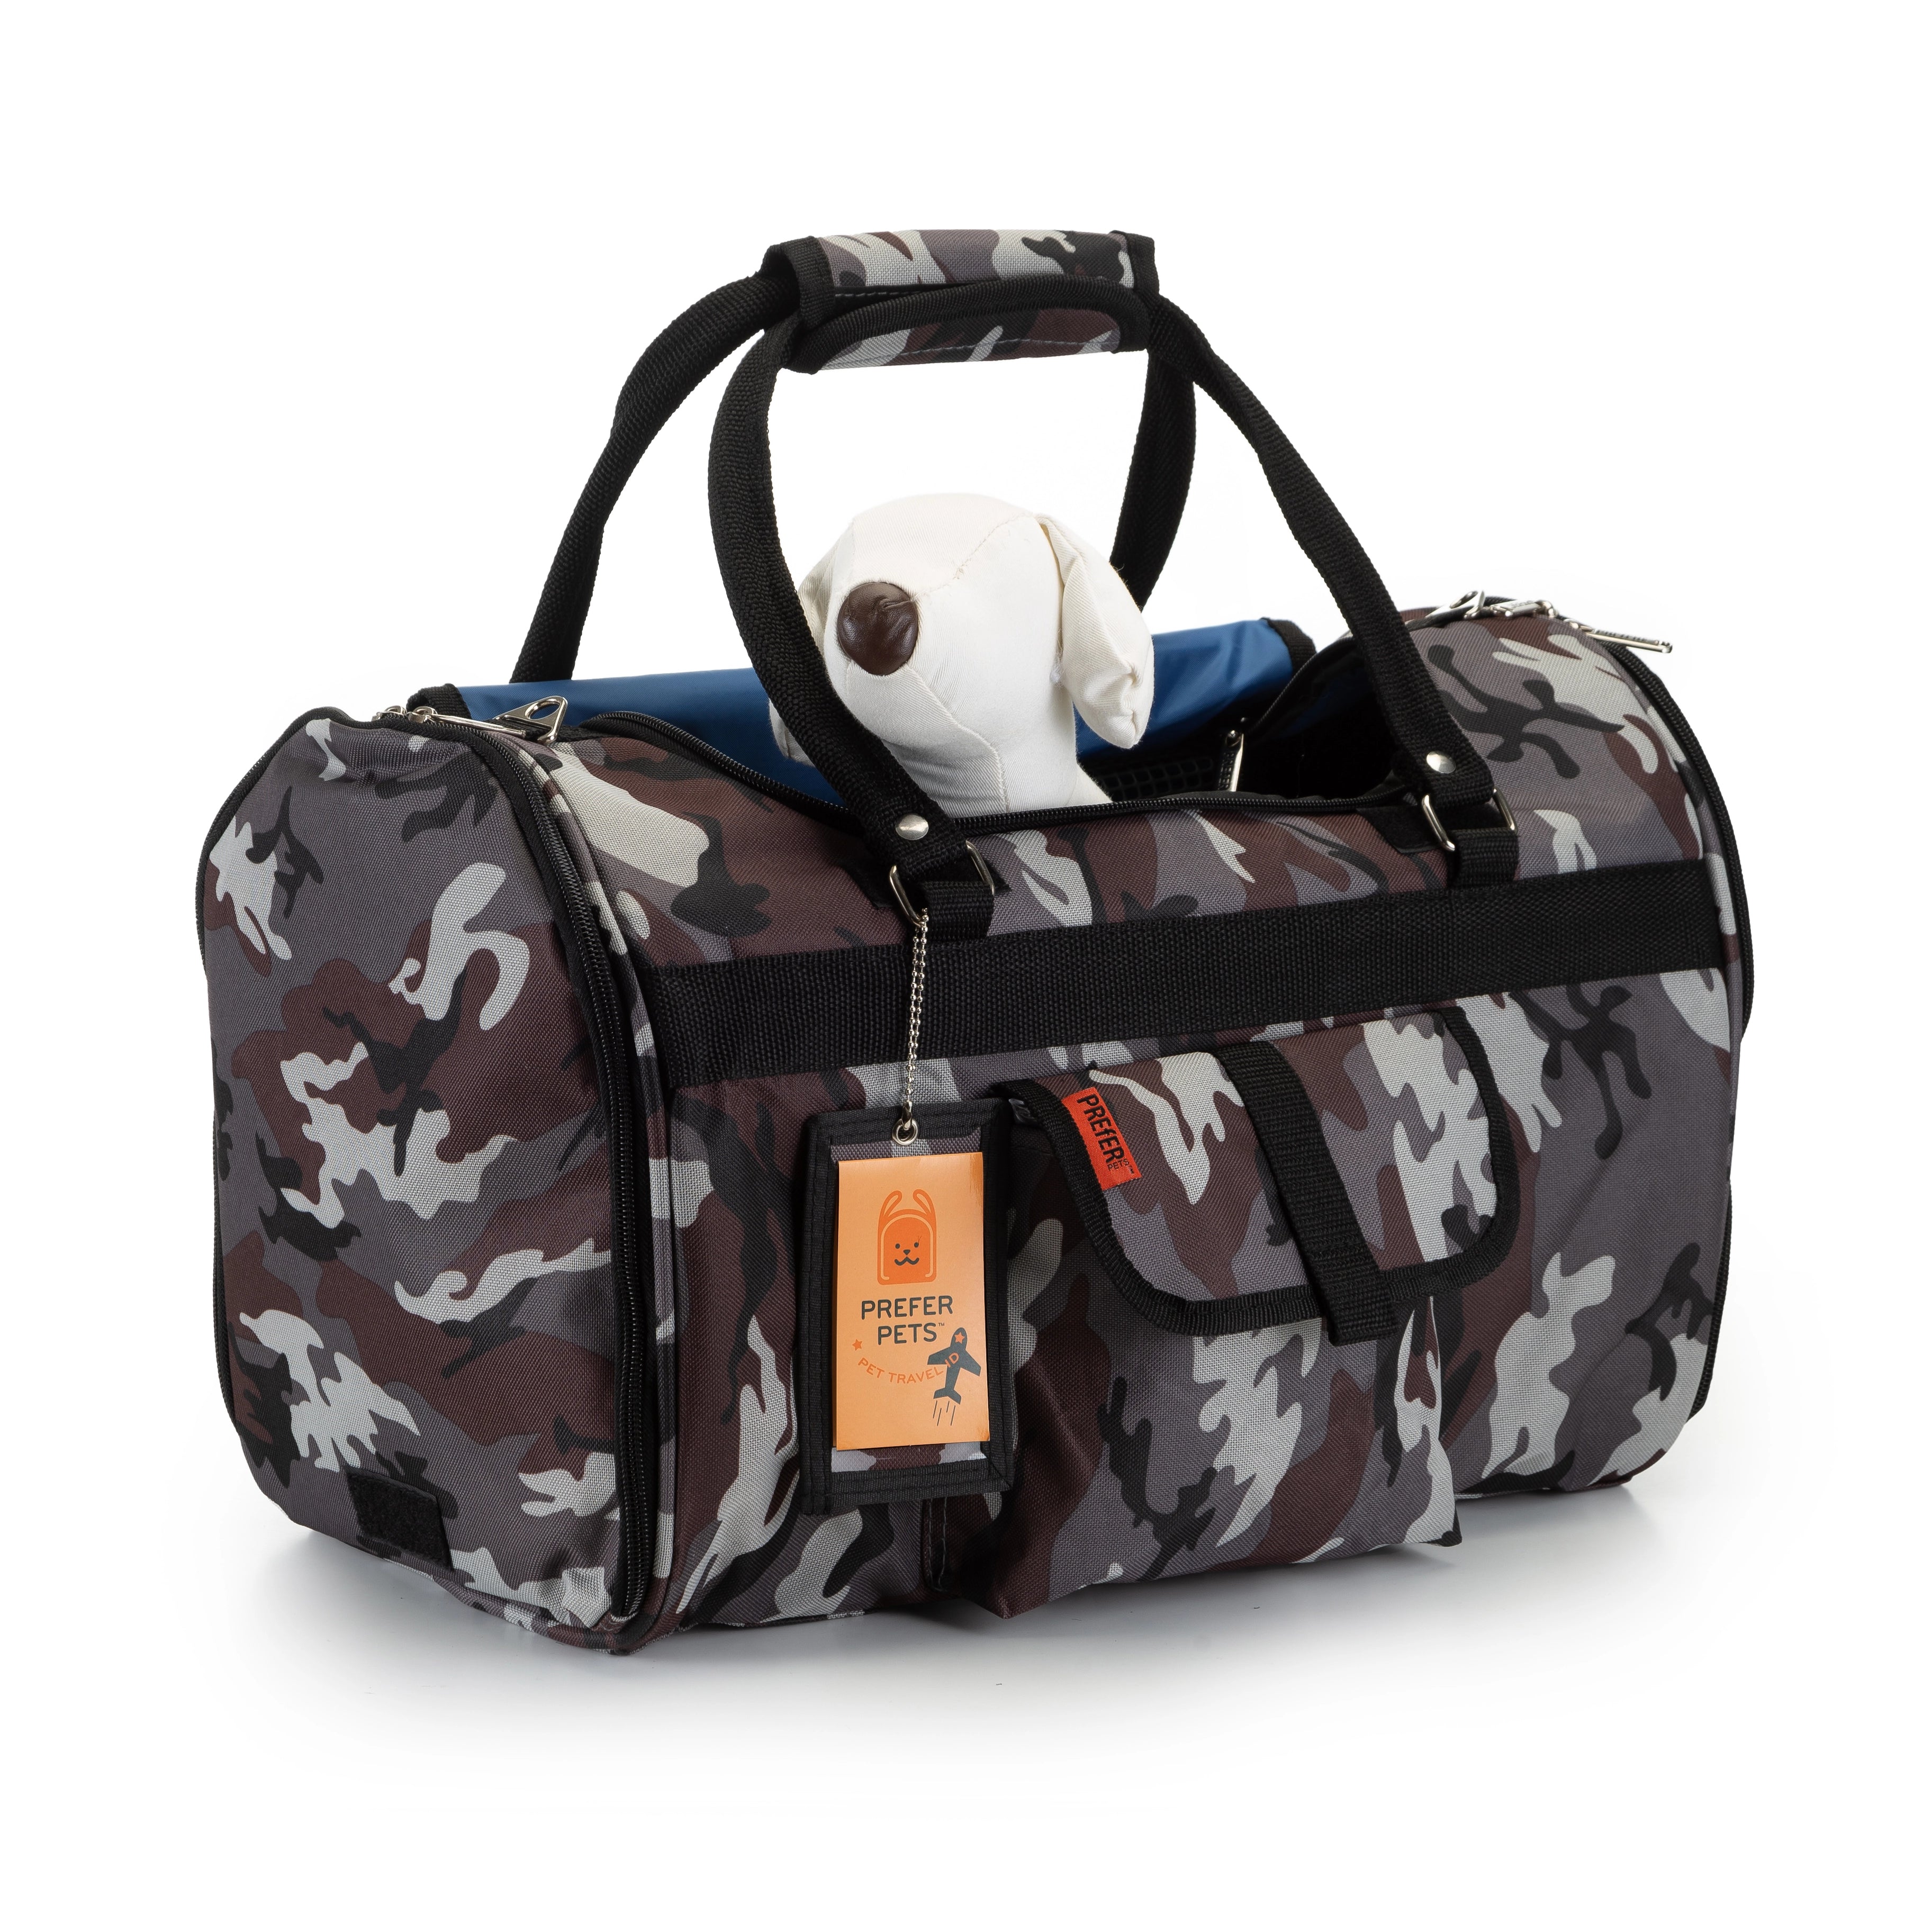 Hideaway Duffel Carry Bag for Dogs - Gray Camouflage